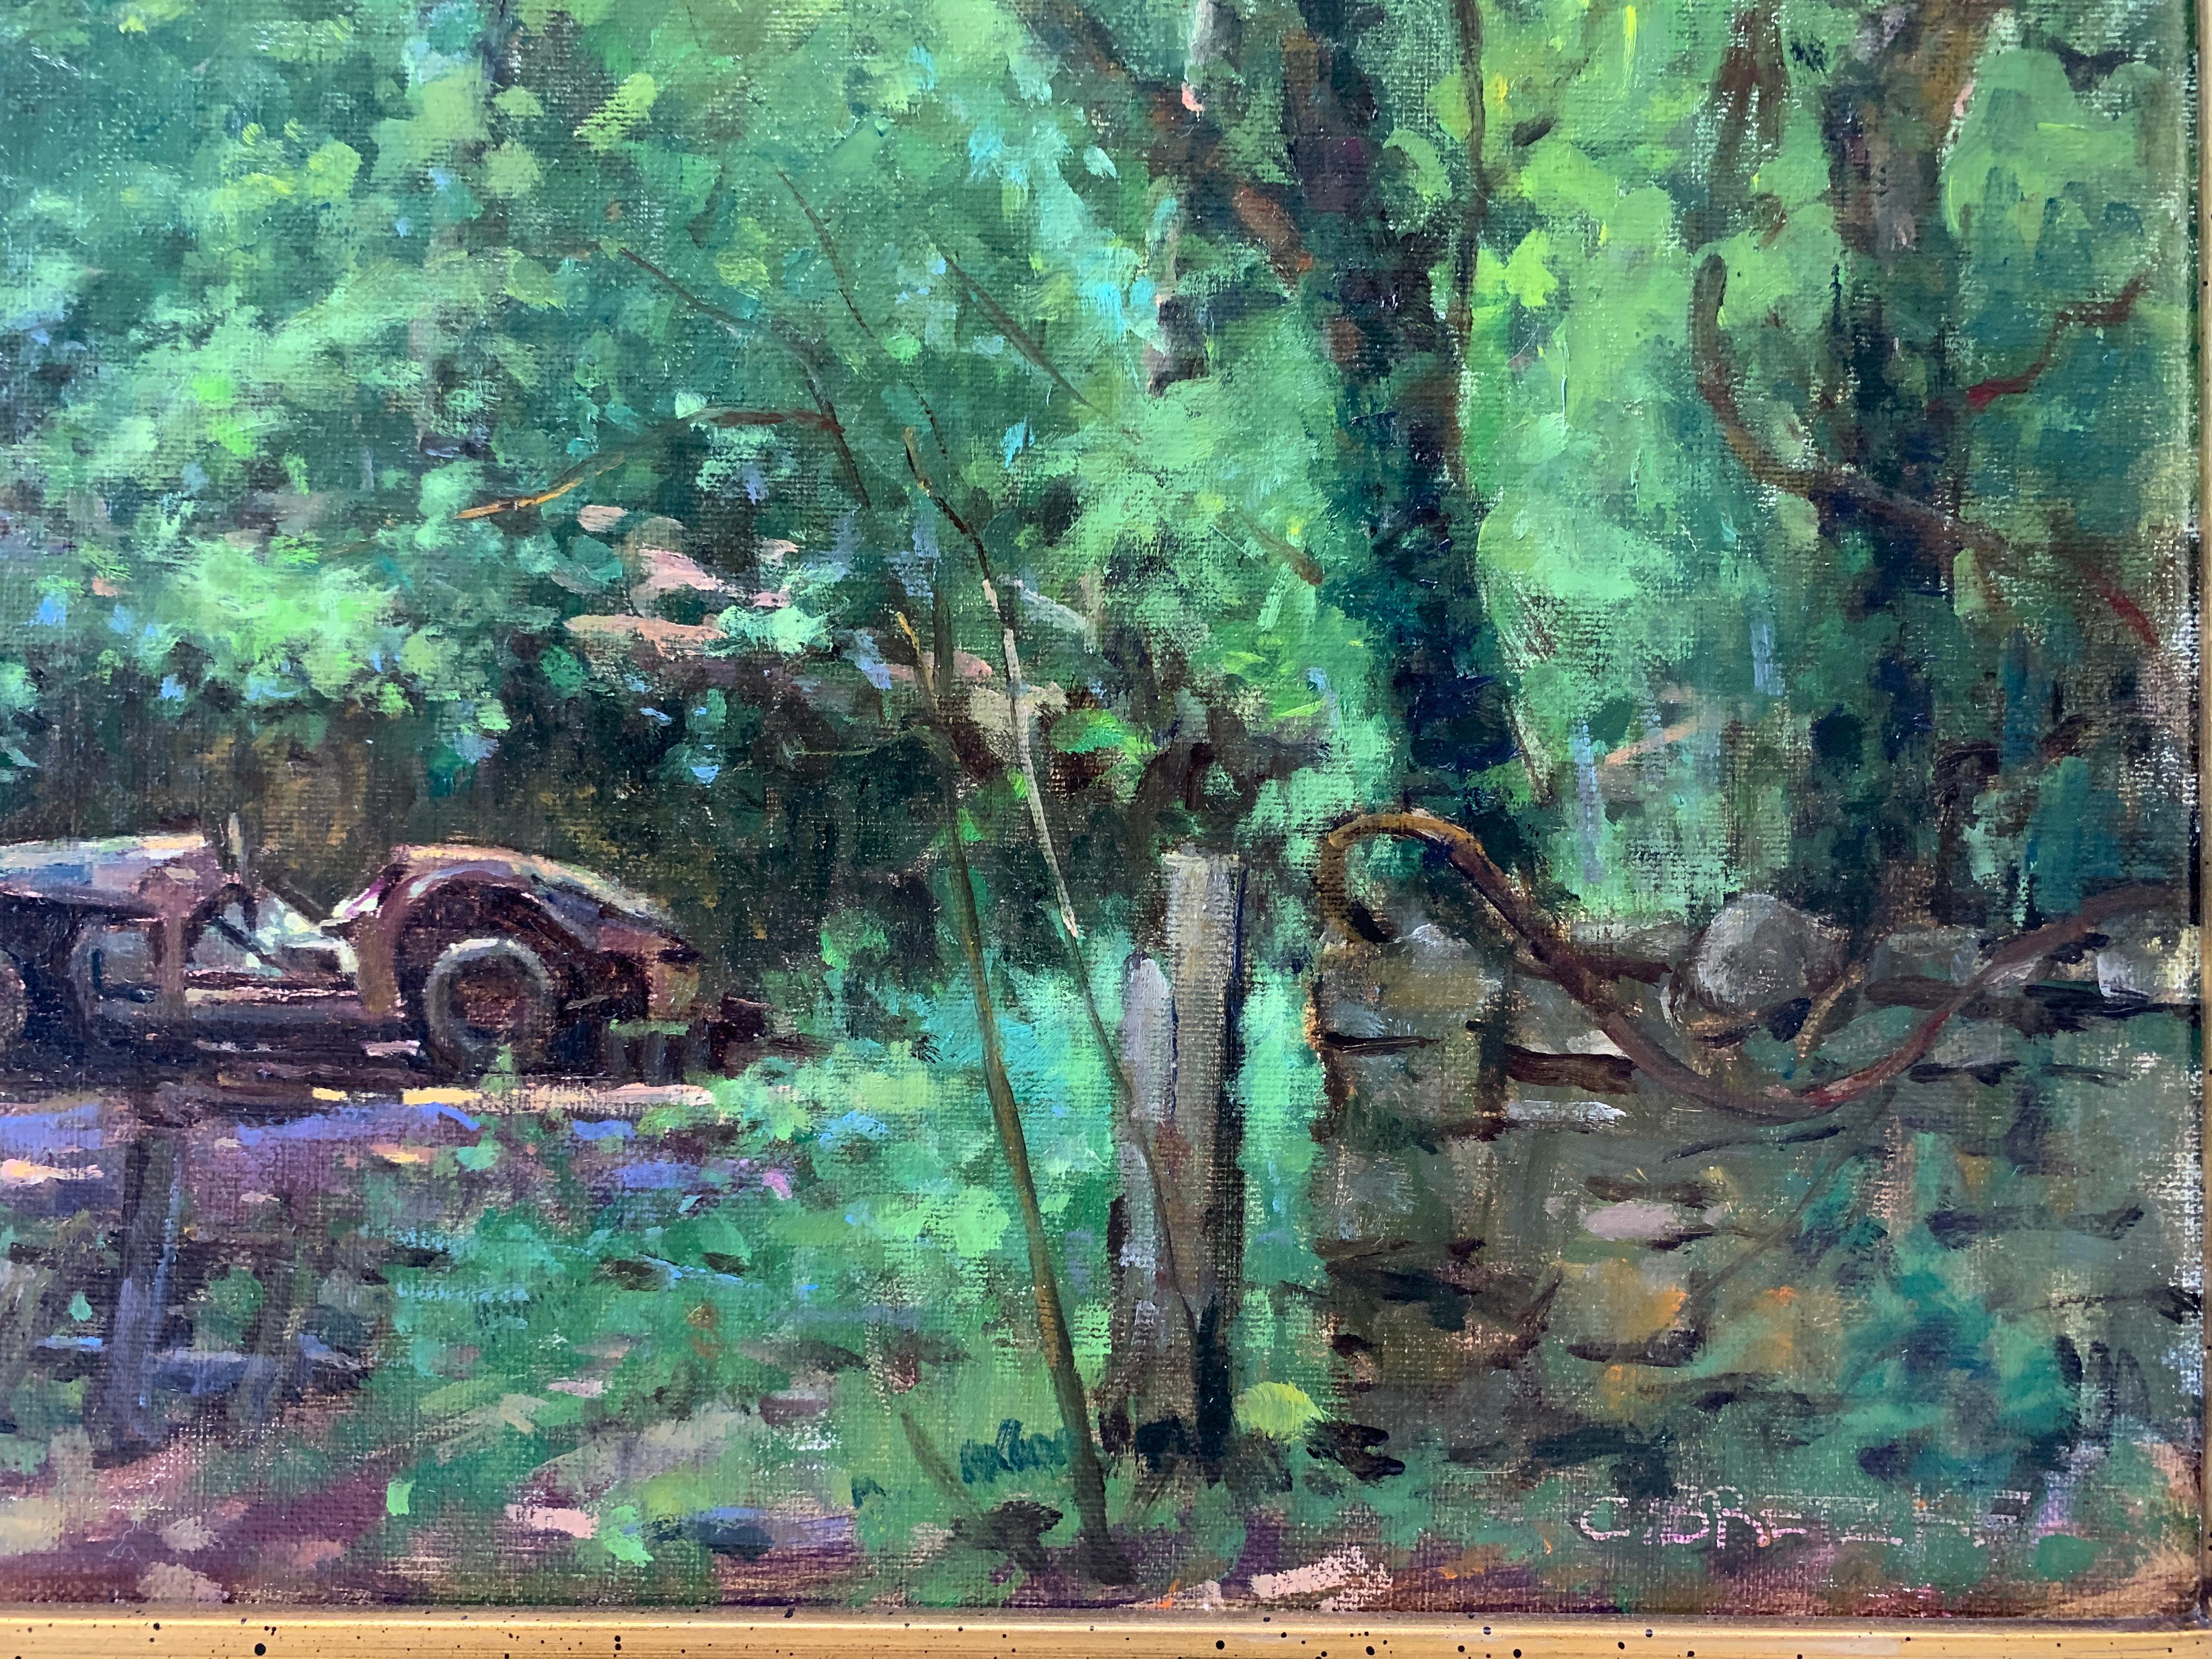 An oil painting of a verdant, wooded area, painted en-plein air in Arkansas. An old, rusted, abandoned race-car, a BMW Triumph, is the focal point behind a time-honored stone wall. Dappled light peeks through the trees from above, casting spots of